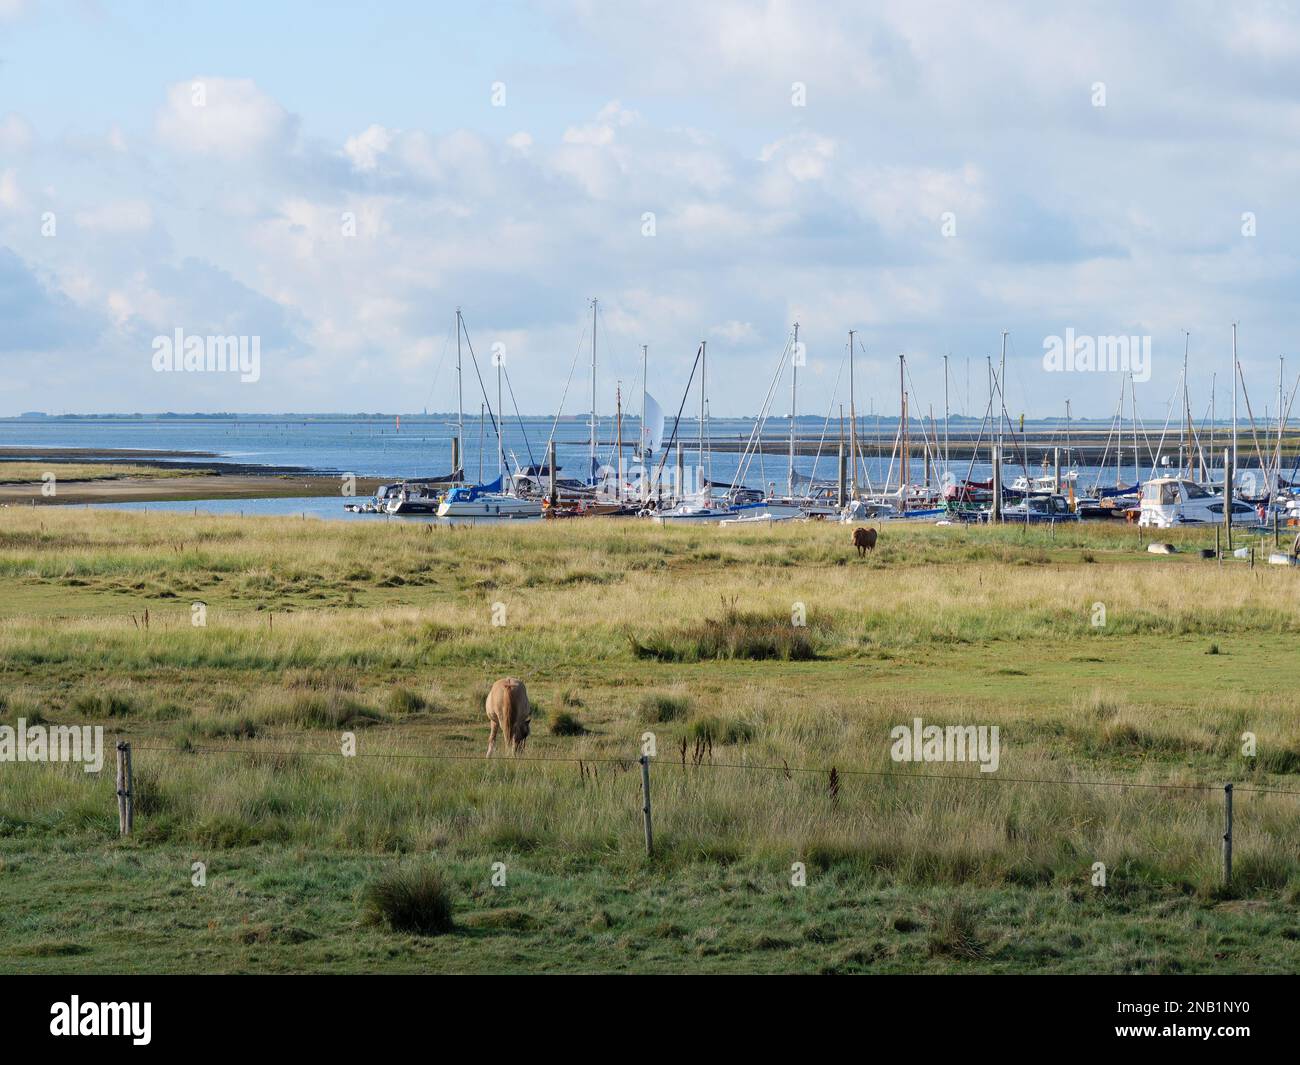 A cow eating in the field and boats row docked on the shoreline in the background at Spiekeroog island, Germany Stock Photo